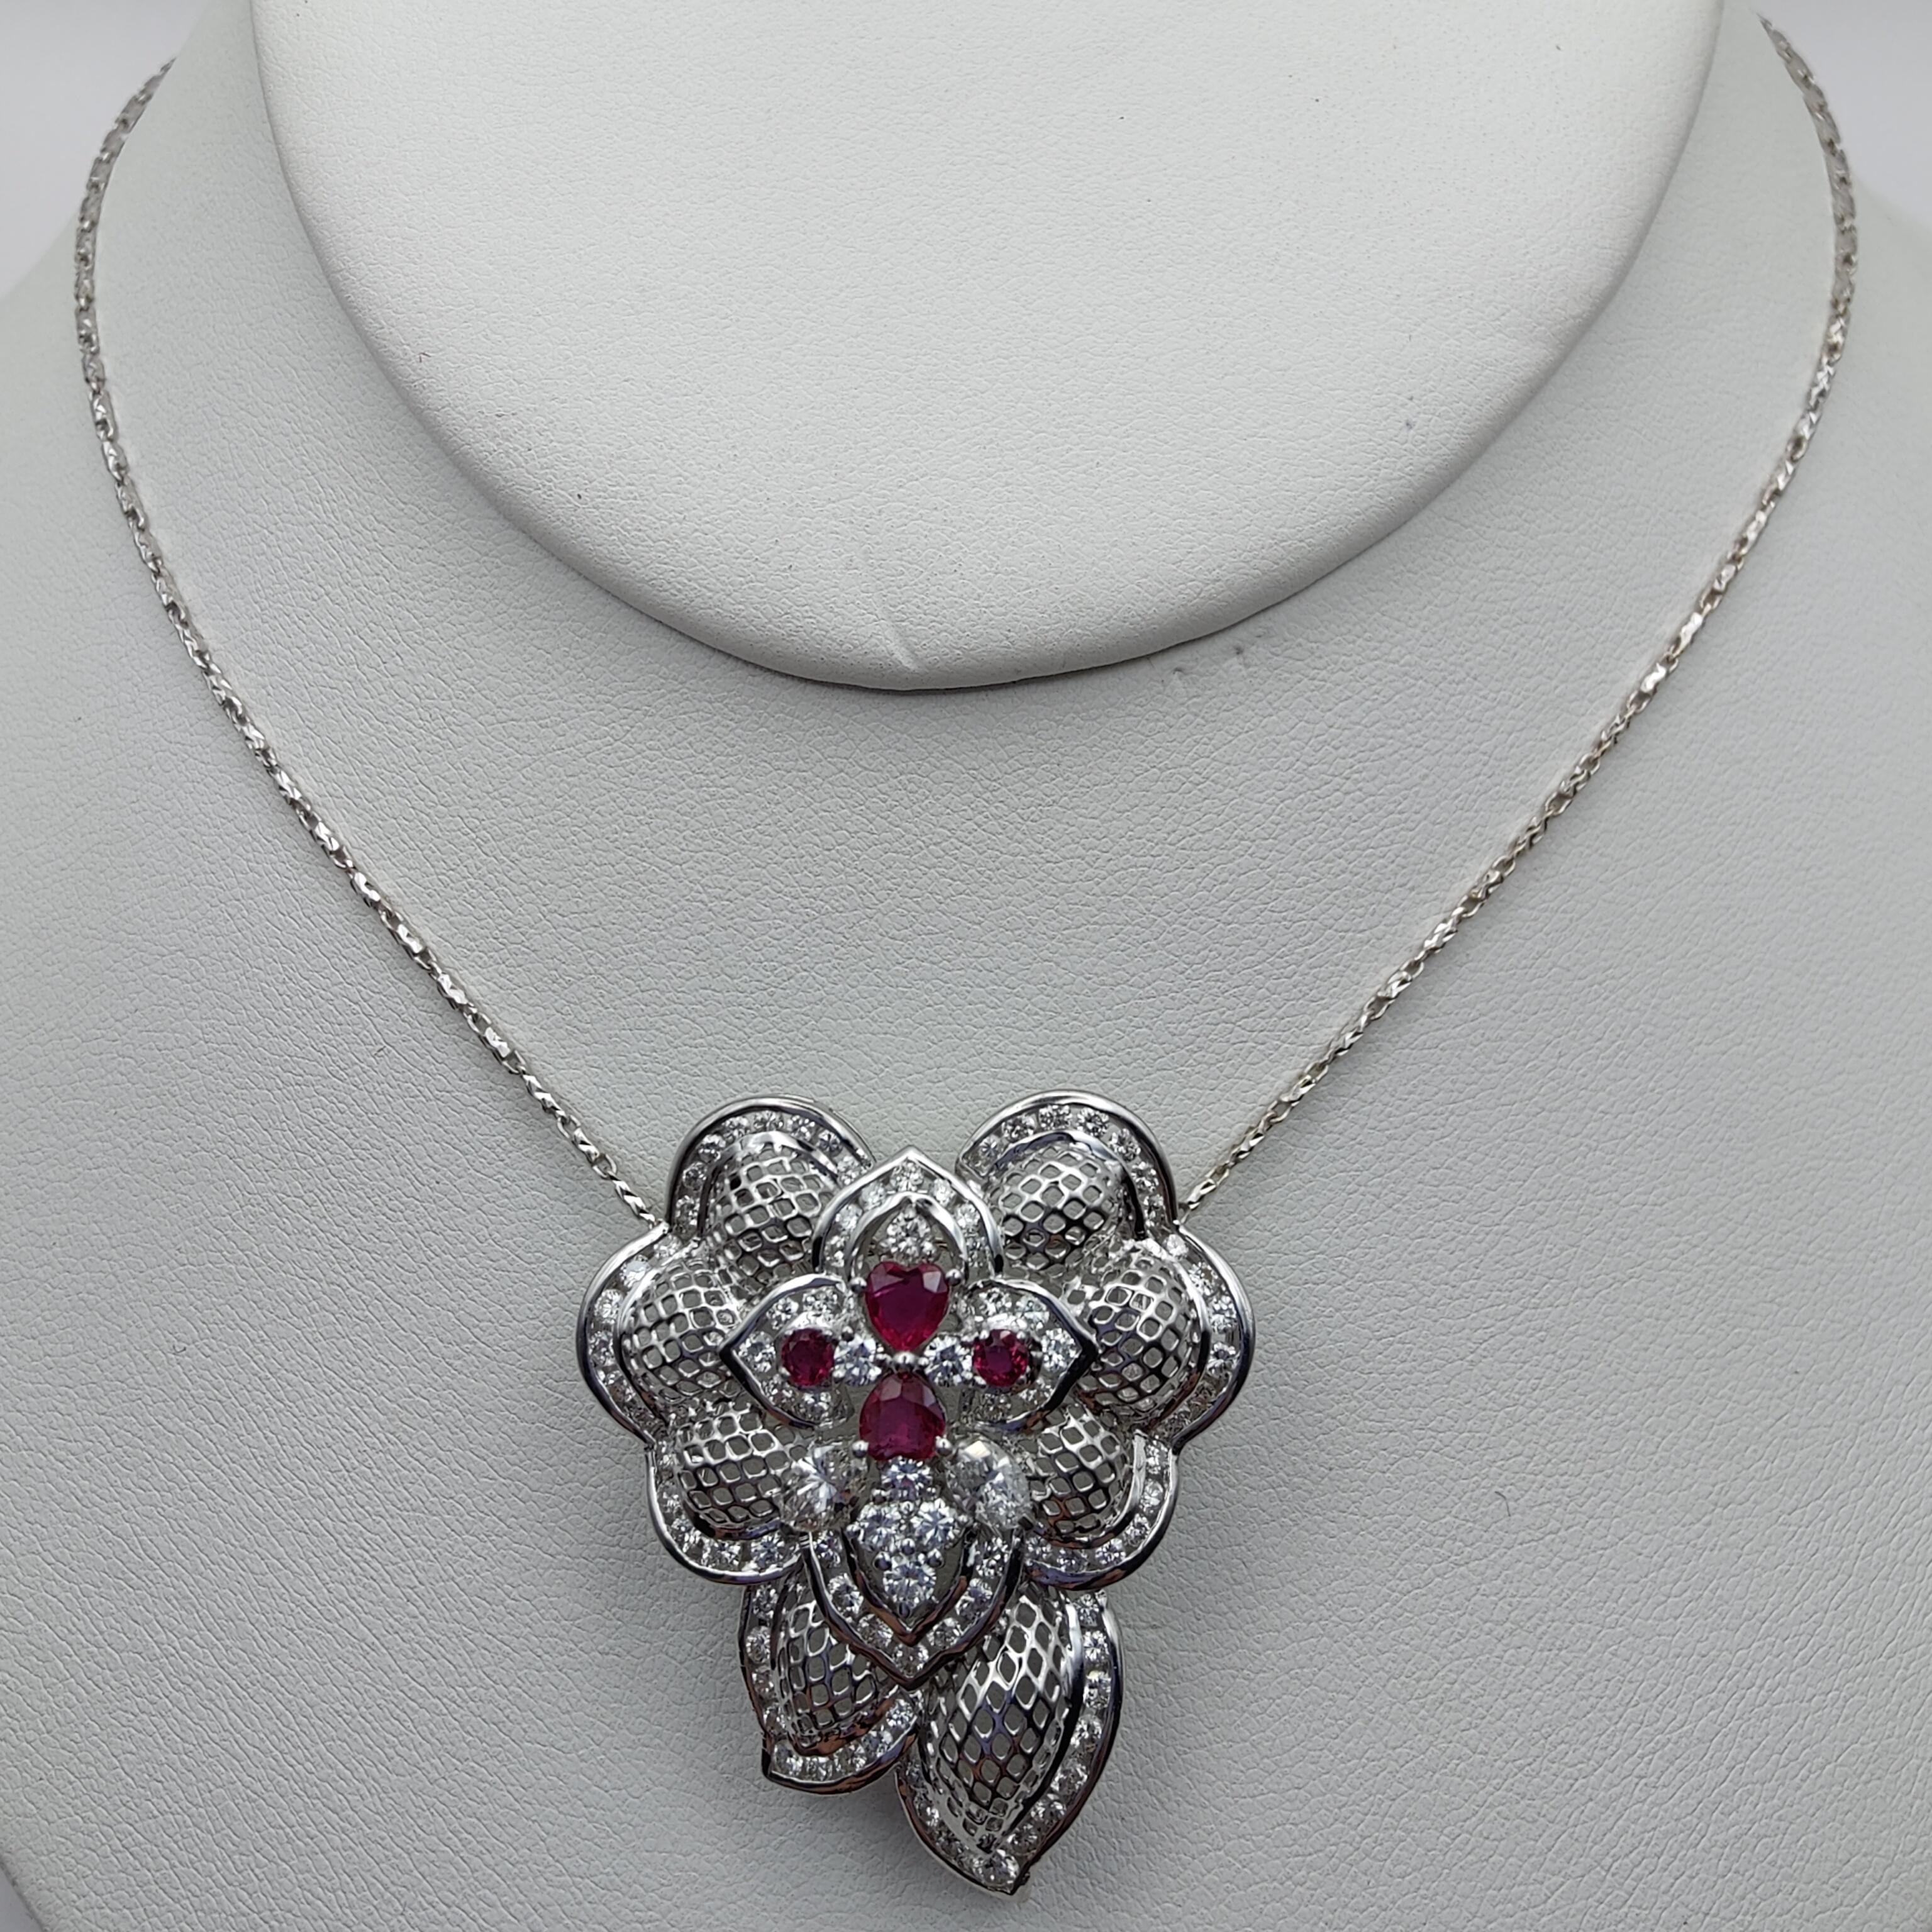 Baroque 0.78 Carat Ruby and 2.7 Carat Diamond Pendant Brooch in 18k White Gold For Sale 3